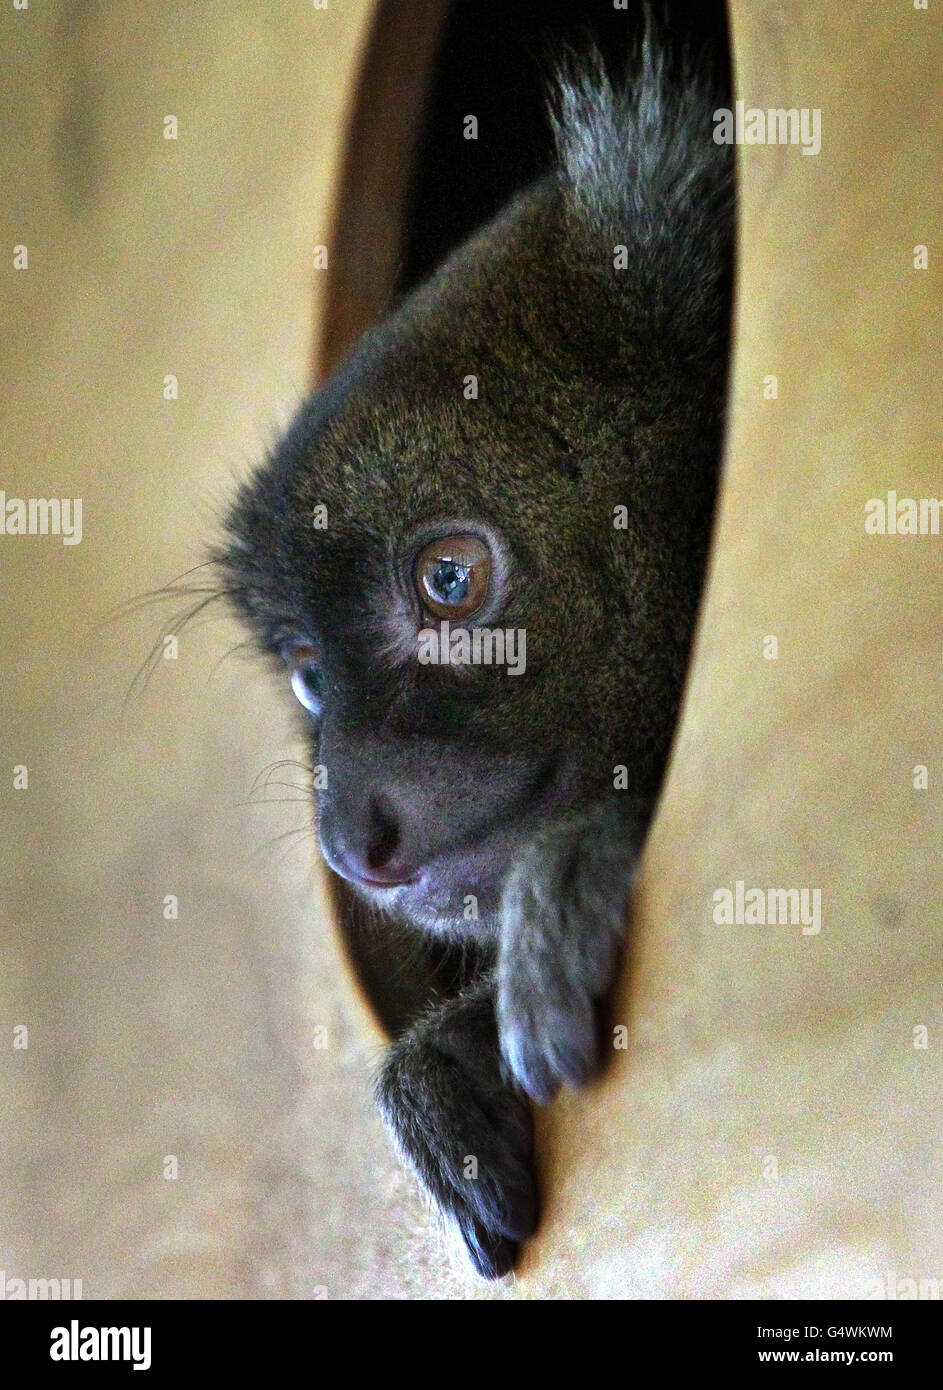 A critically endangered female Greater Bamboo Lemur, one of only 19 in animal collections throughout the world peers out from enclosure after arriving from France at Port Lympne Wild Animal Park near Ashford, Kent. Stock Photo